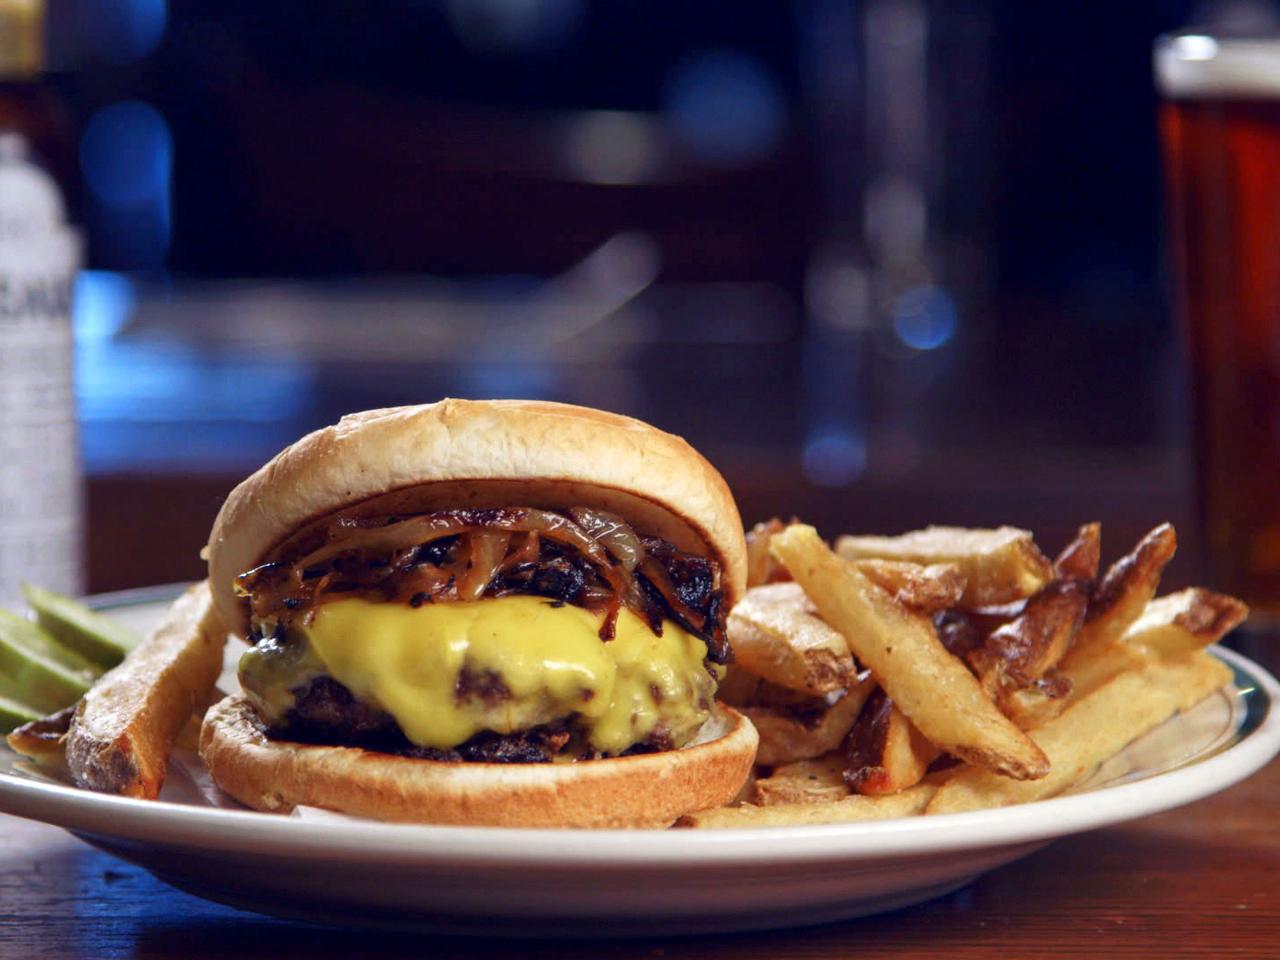 It’s All About Burgers on Top 5 Restaurants — Vote for Your Favorite